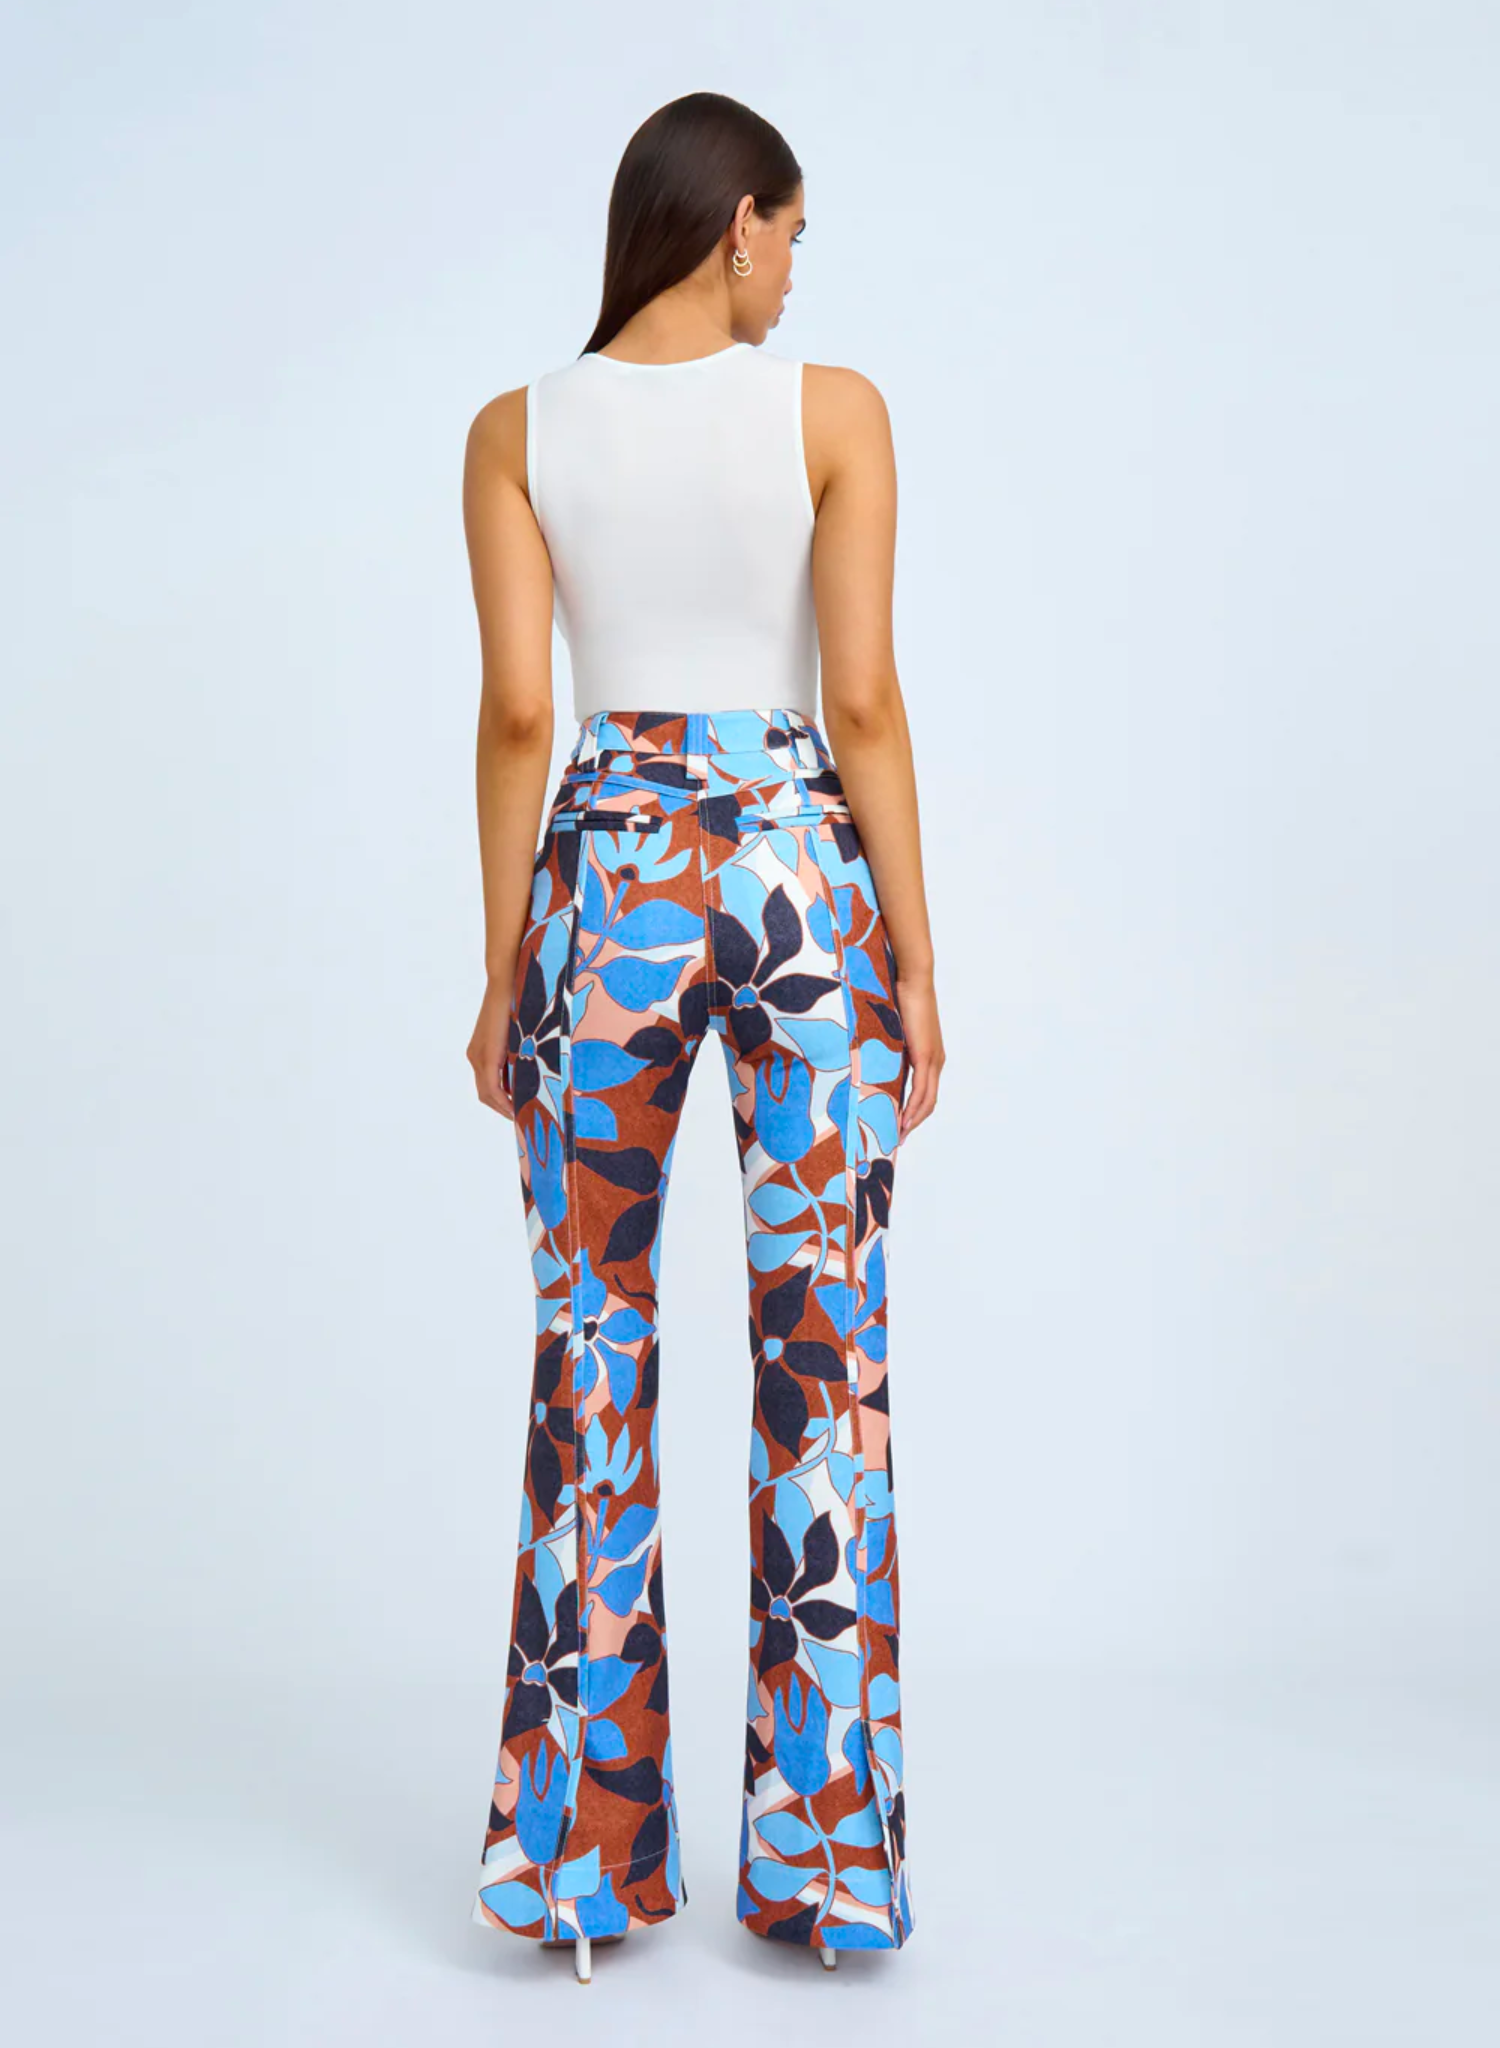 OPHELIA FLORAL FLARE PANT IN NAVY TAN BROWN IVORY